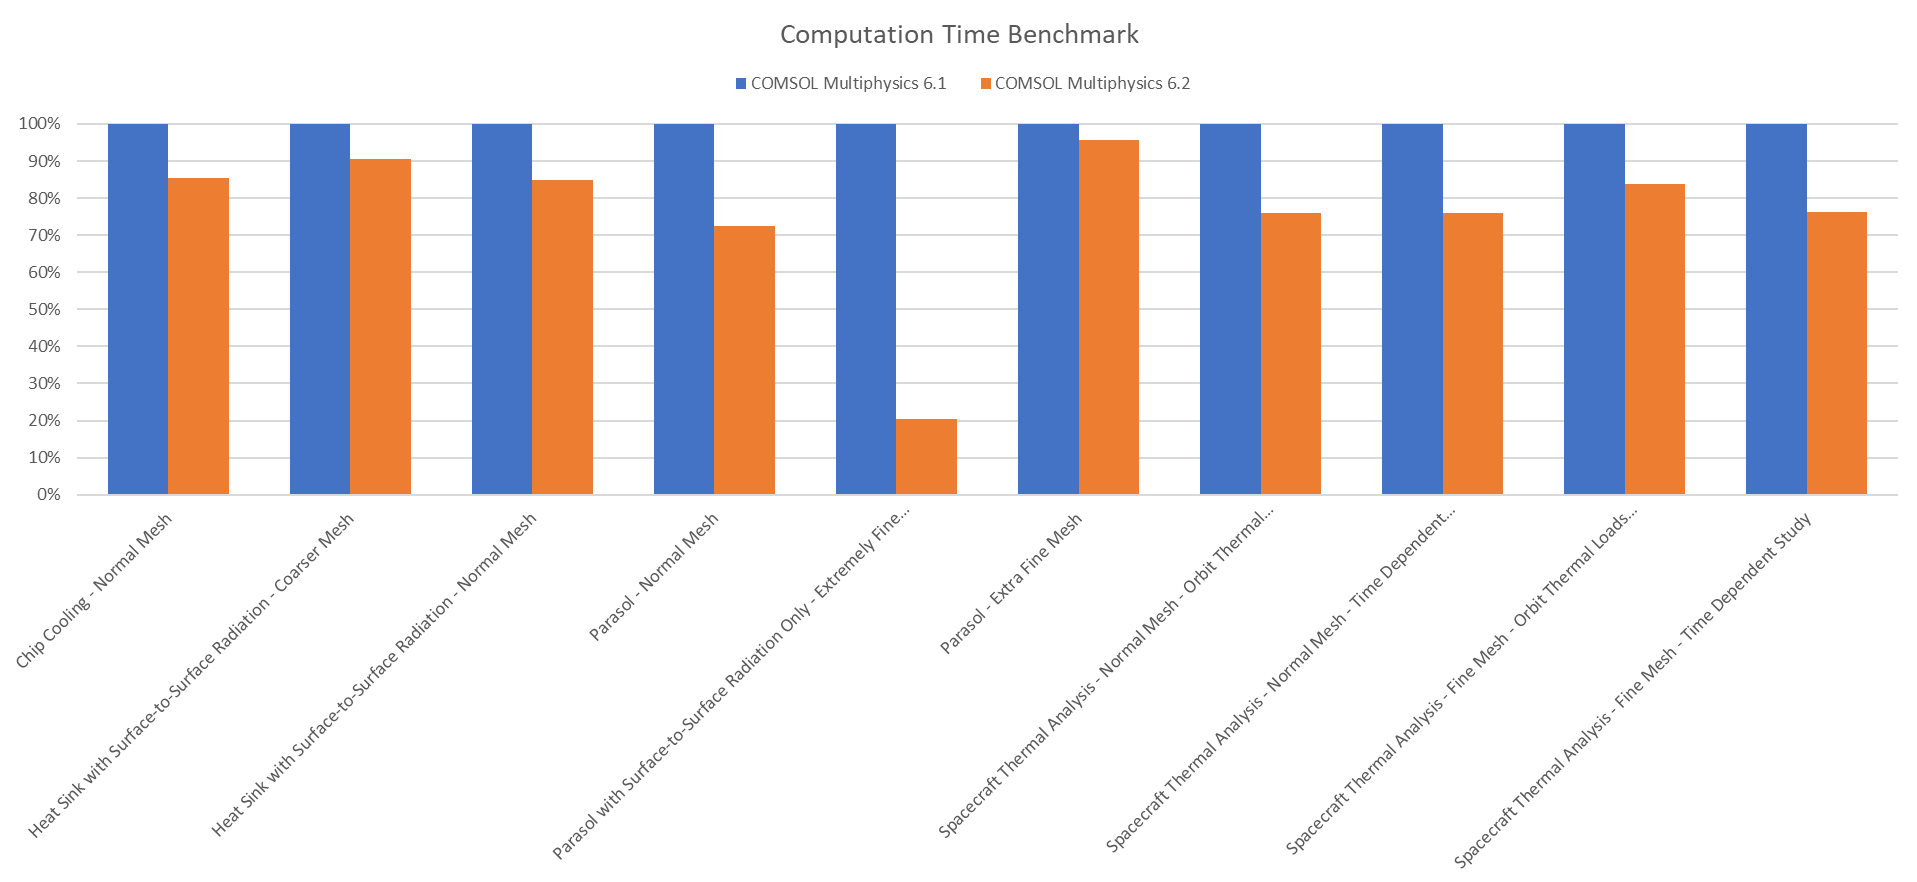 A histogram showing the difference in the percentage computational time of various benchmark models when using COMSOL Multiphysics version 6.1 and COMSOL Multiphysics version 6.2.